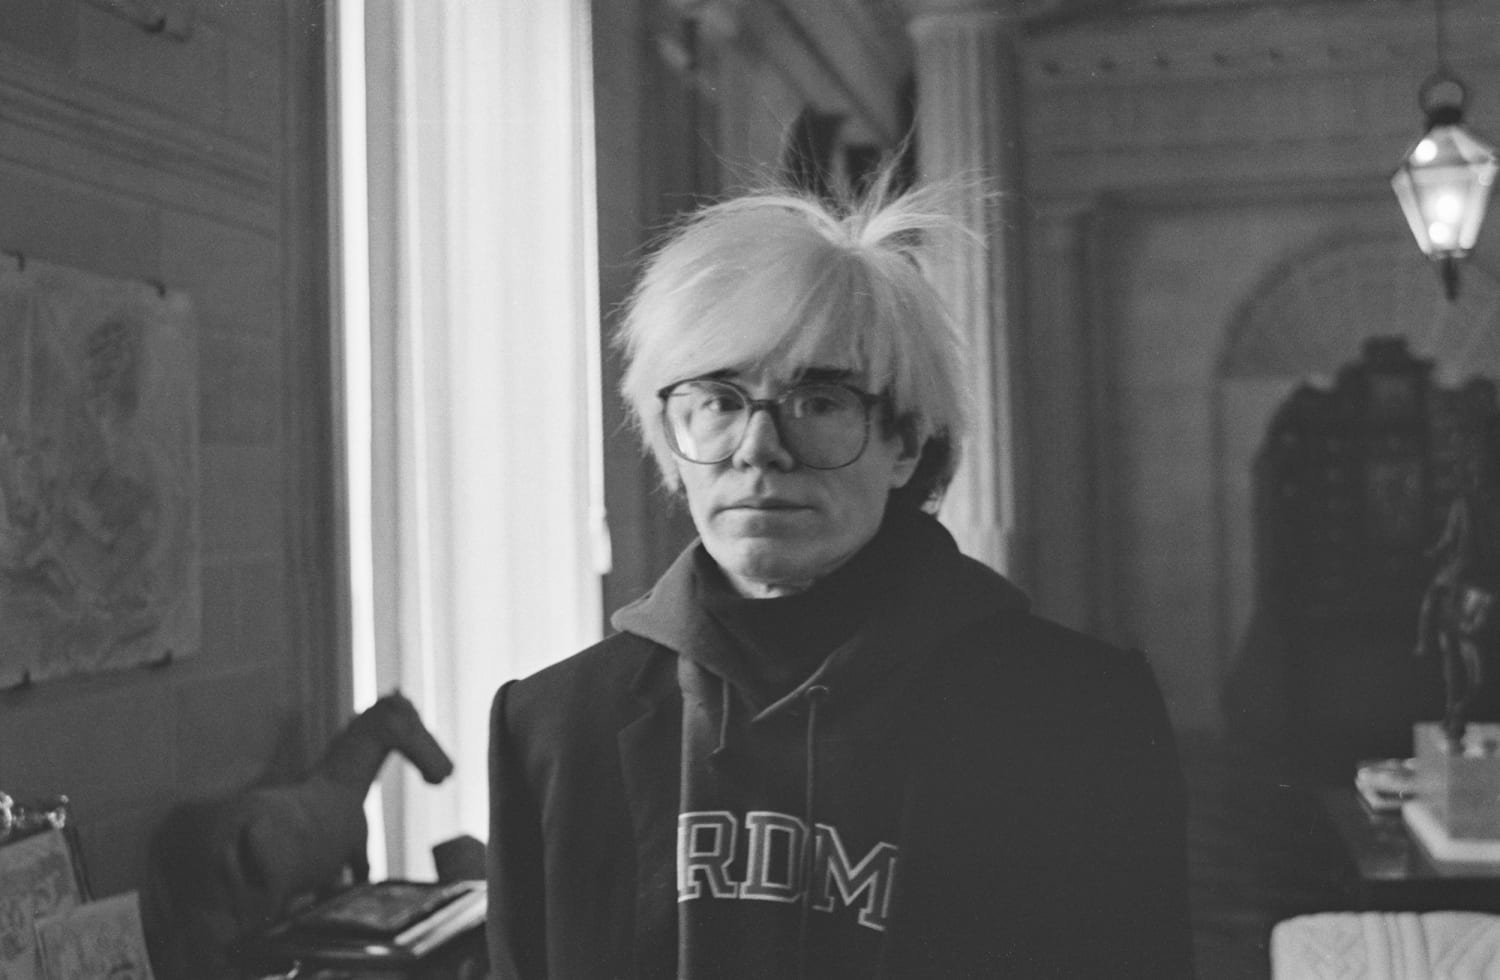 The Andy Warhol Diaries explores how the iconic artist was shaped by his great loves photo